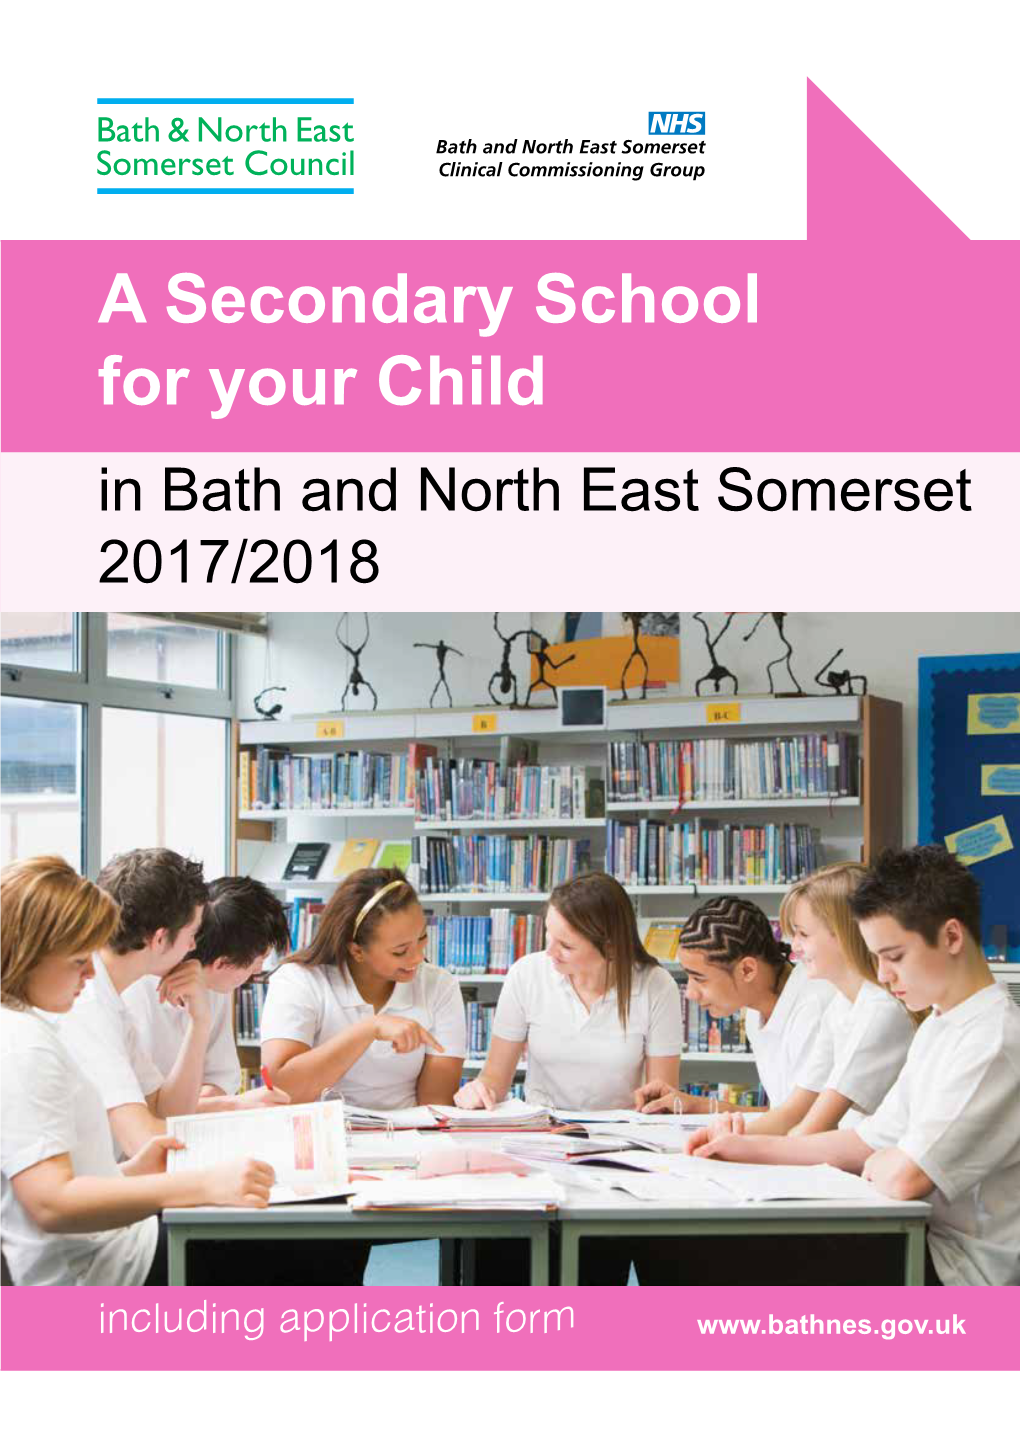 A Secondary School for Your Child in Bath and North East Somerset 2017/2018